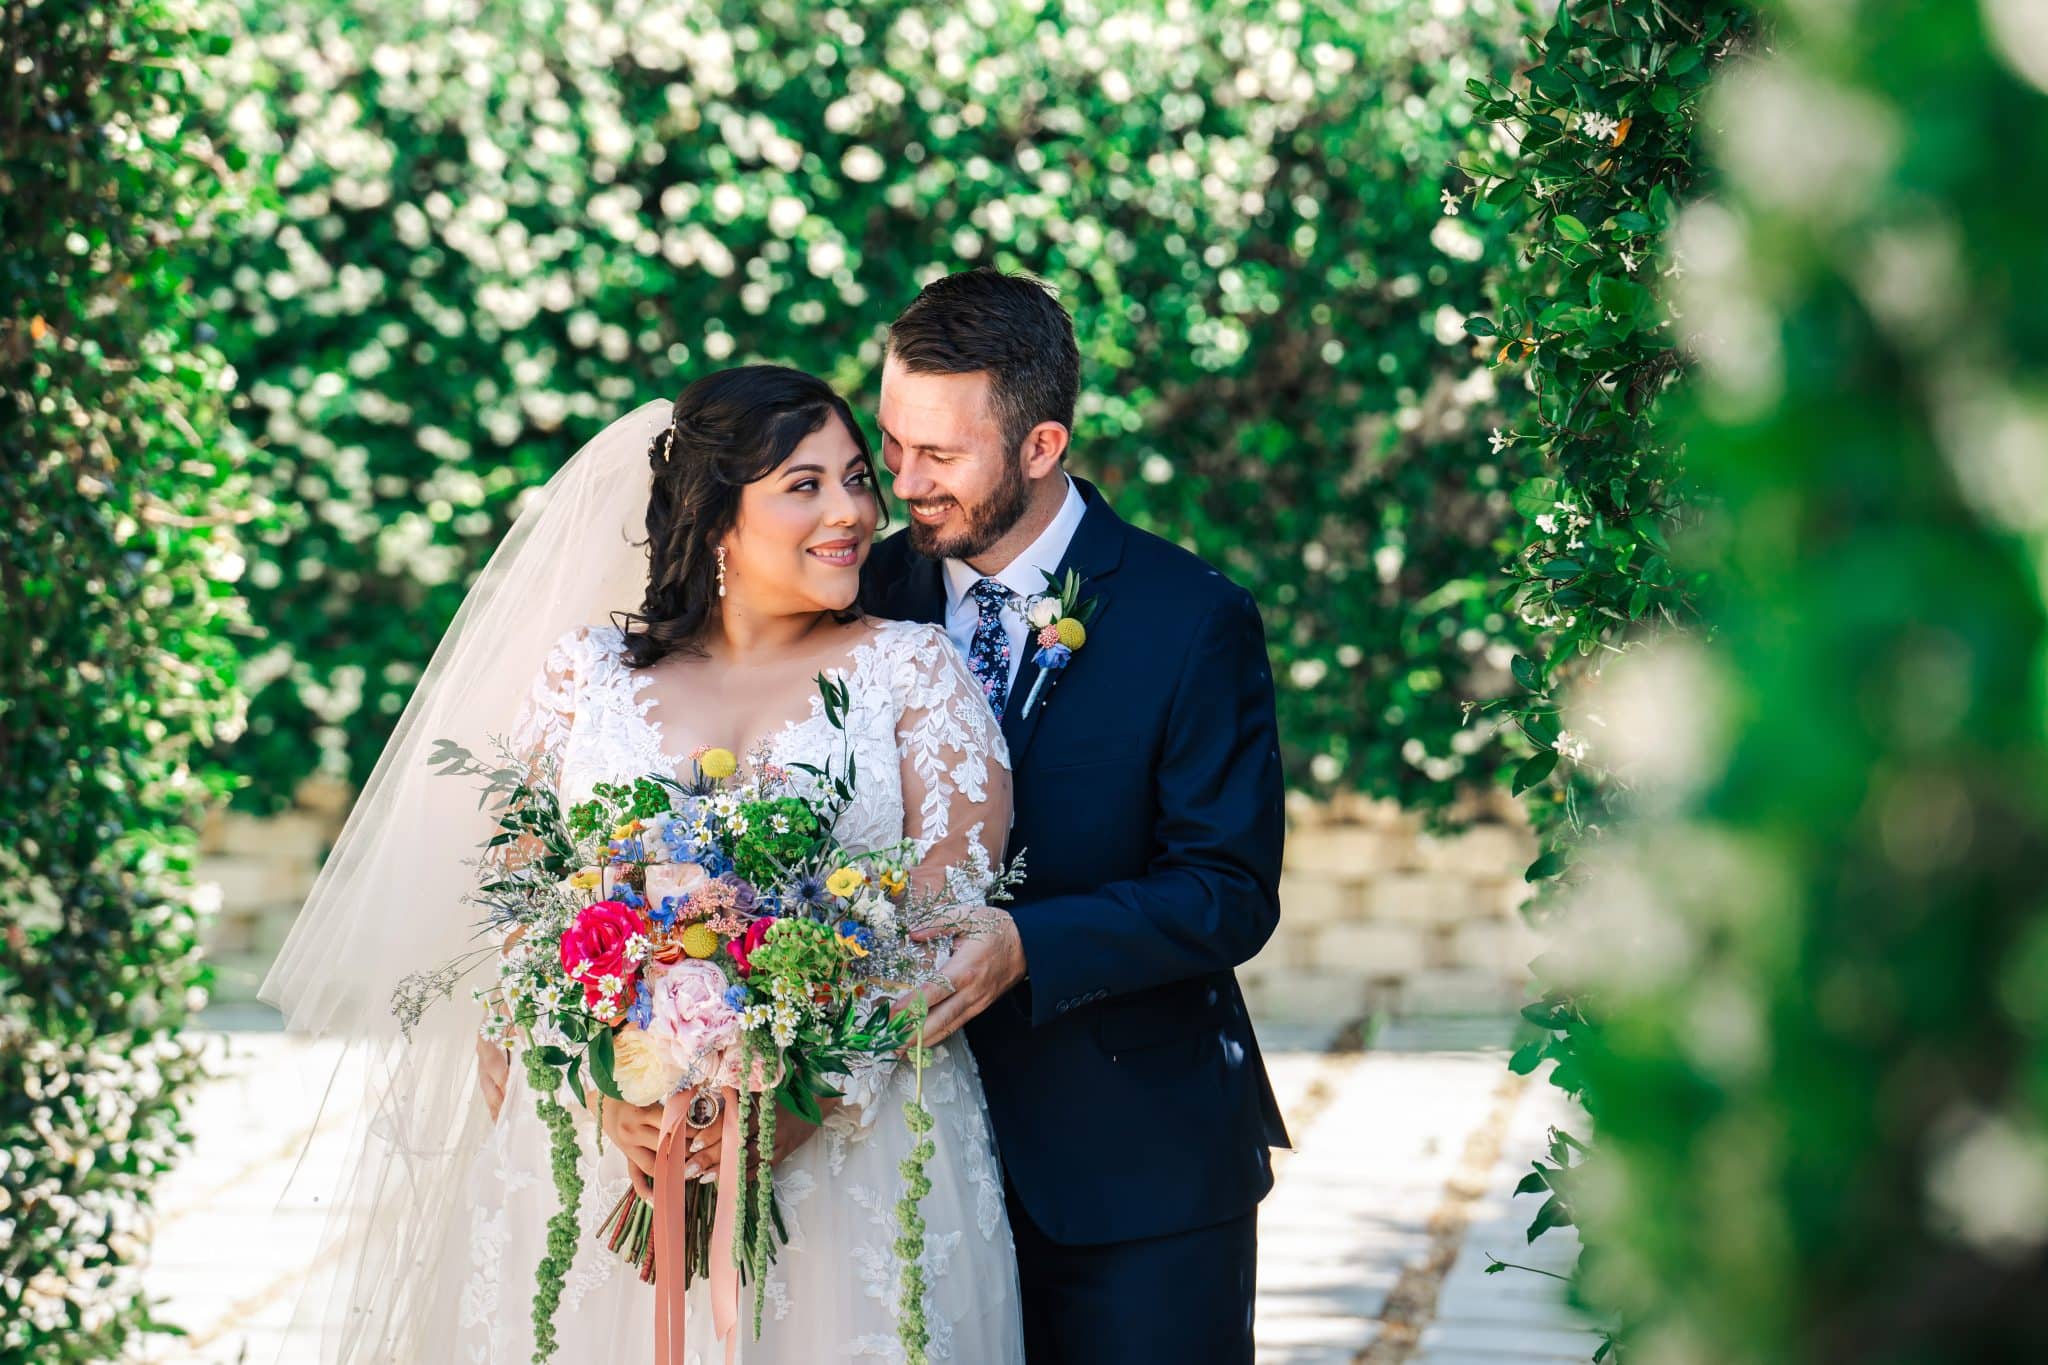 Newlyweds pose together under a garden archway with colorful flower bouquet in whimsical wedding at Hidden Barn Venue in Apopka, FL